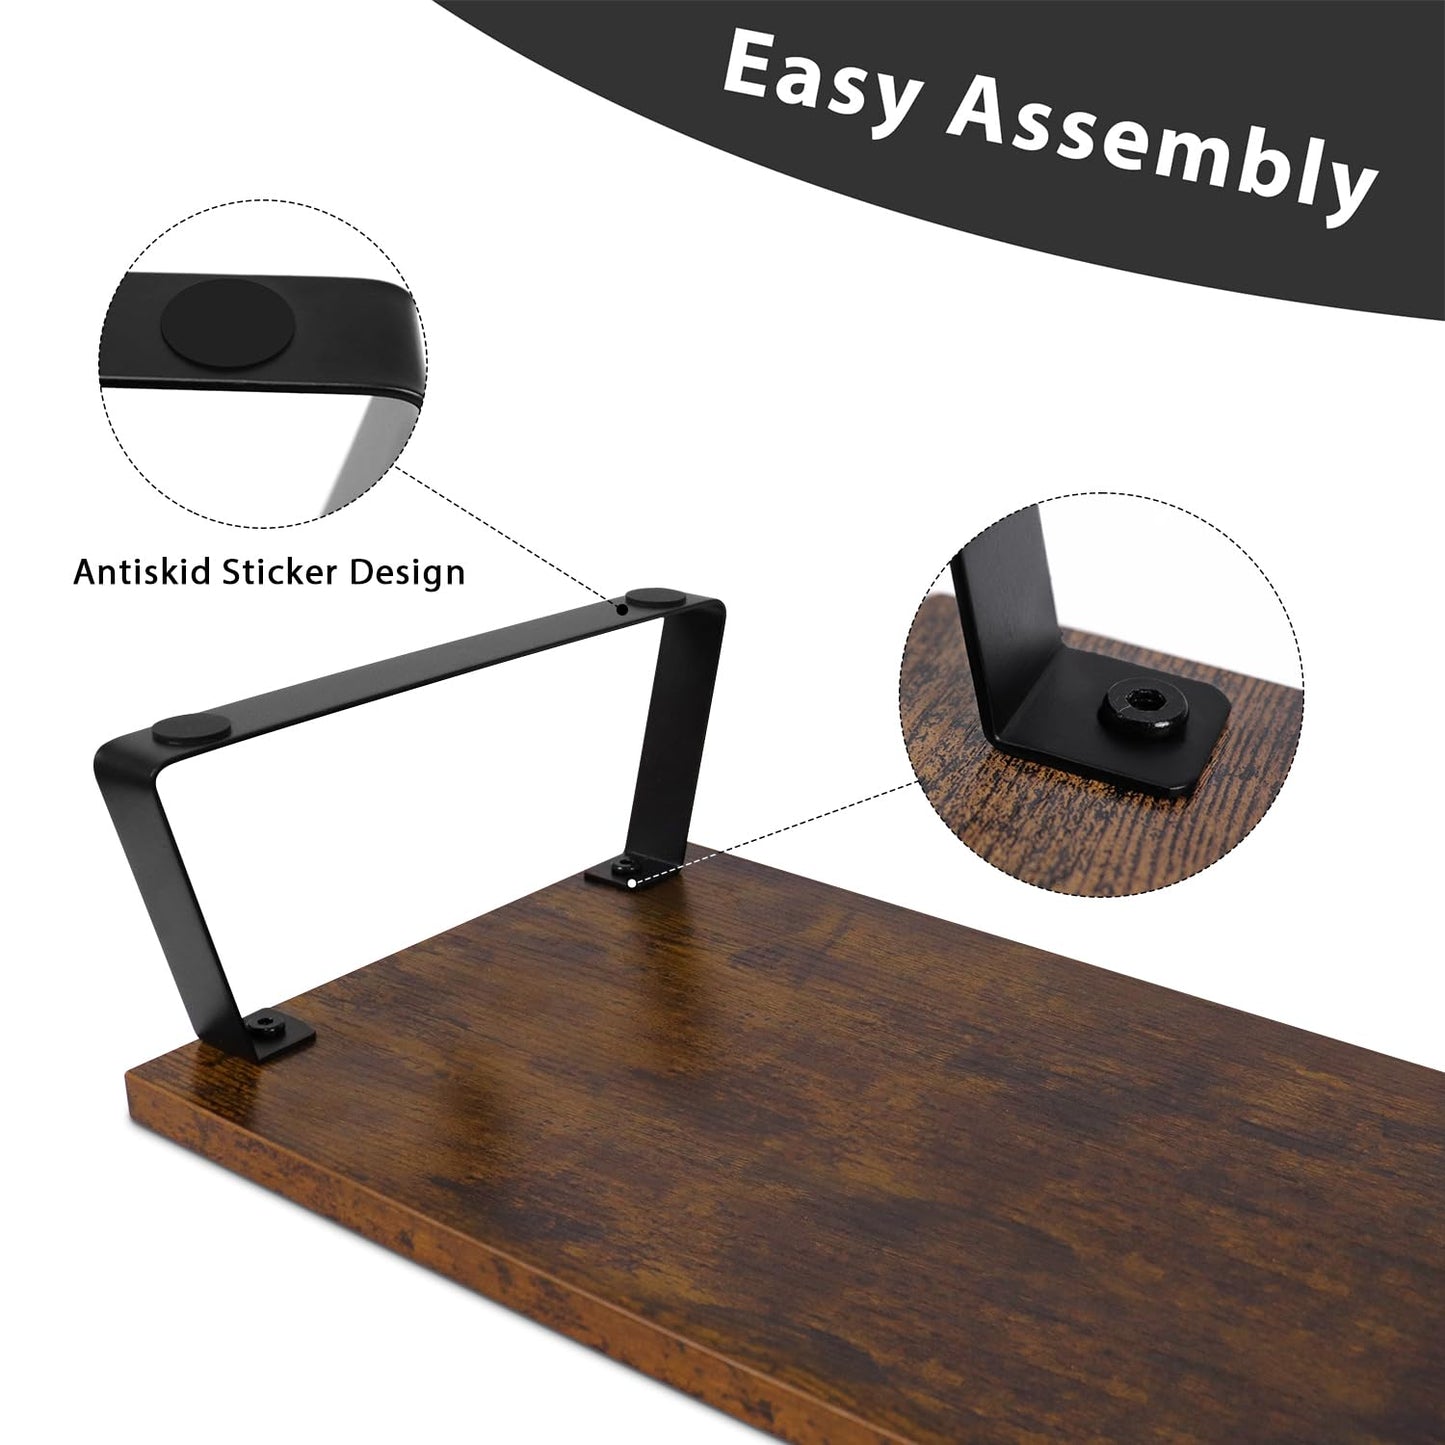 Desktop Dual Monitor Stand Riser - Wood Monitor Stand for 2 Monitors, Computer Stand with Metal Legs & Drawer, Office Desk Organizers and Storage, Monitor Shelf for Computer/Laptop/Printer/TV, Vintage